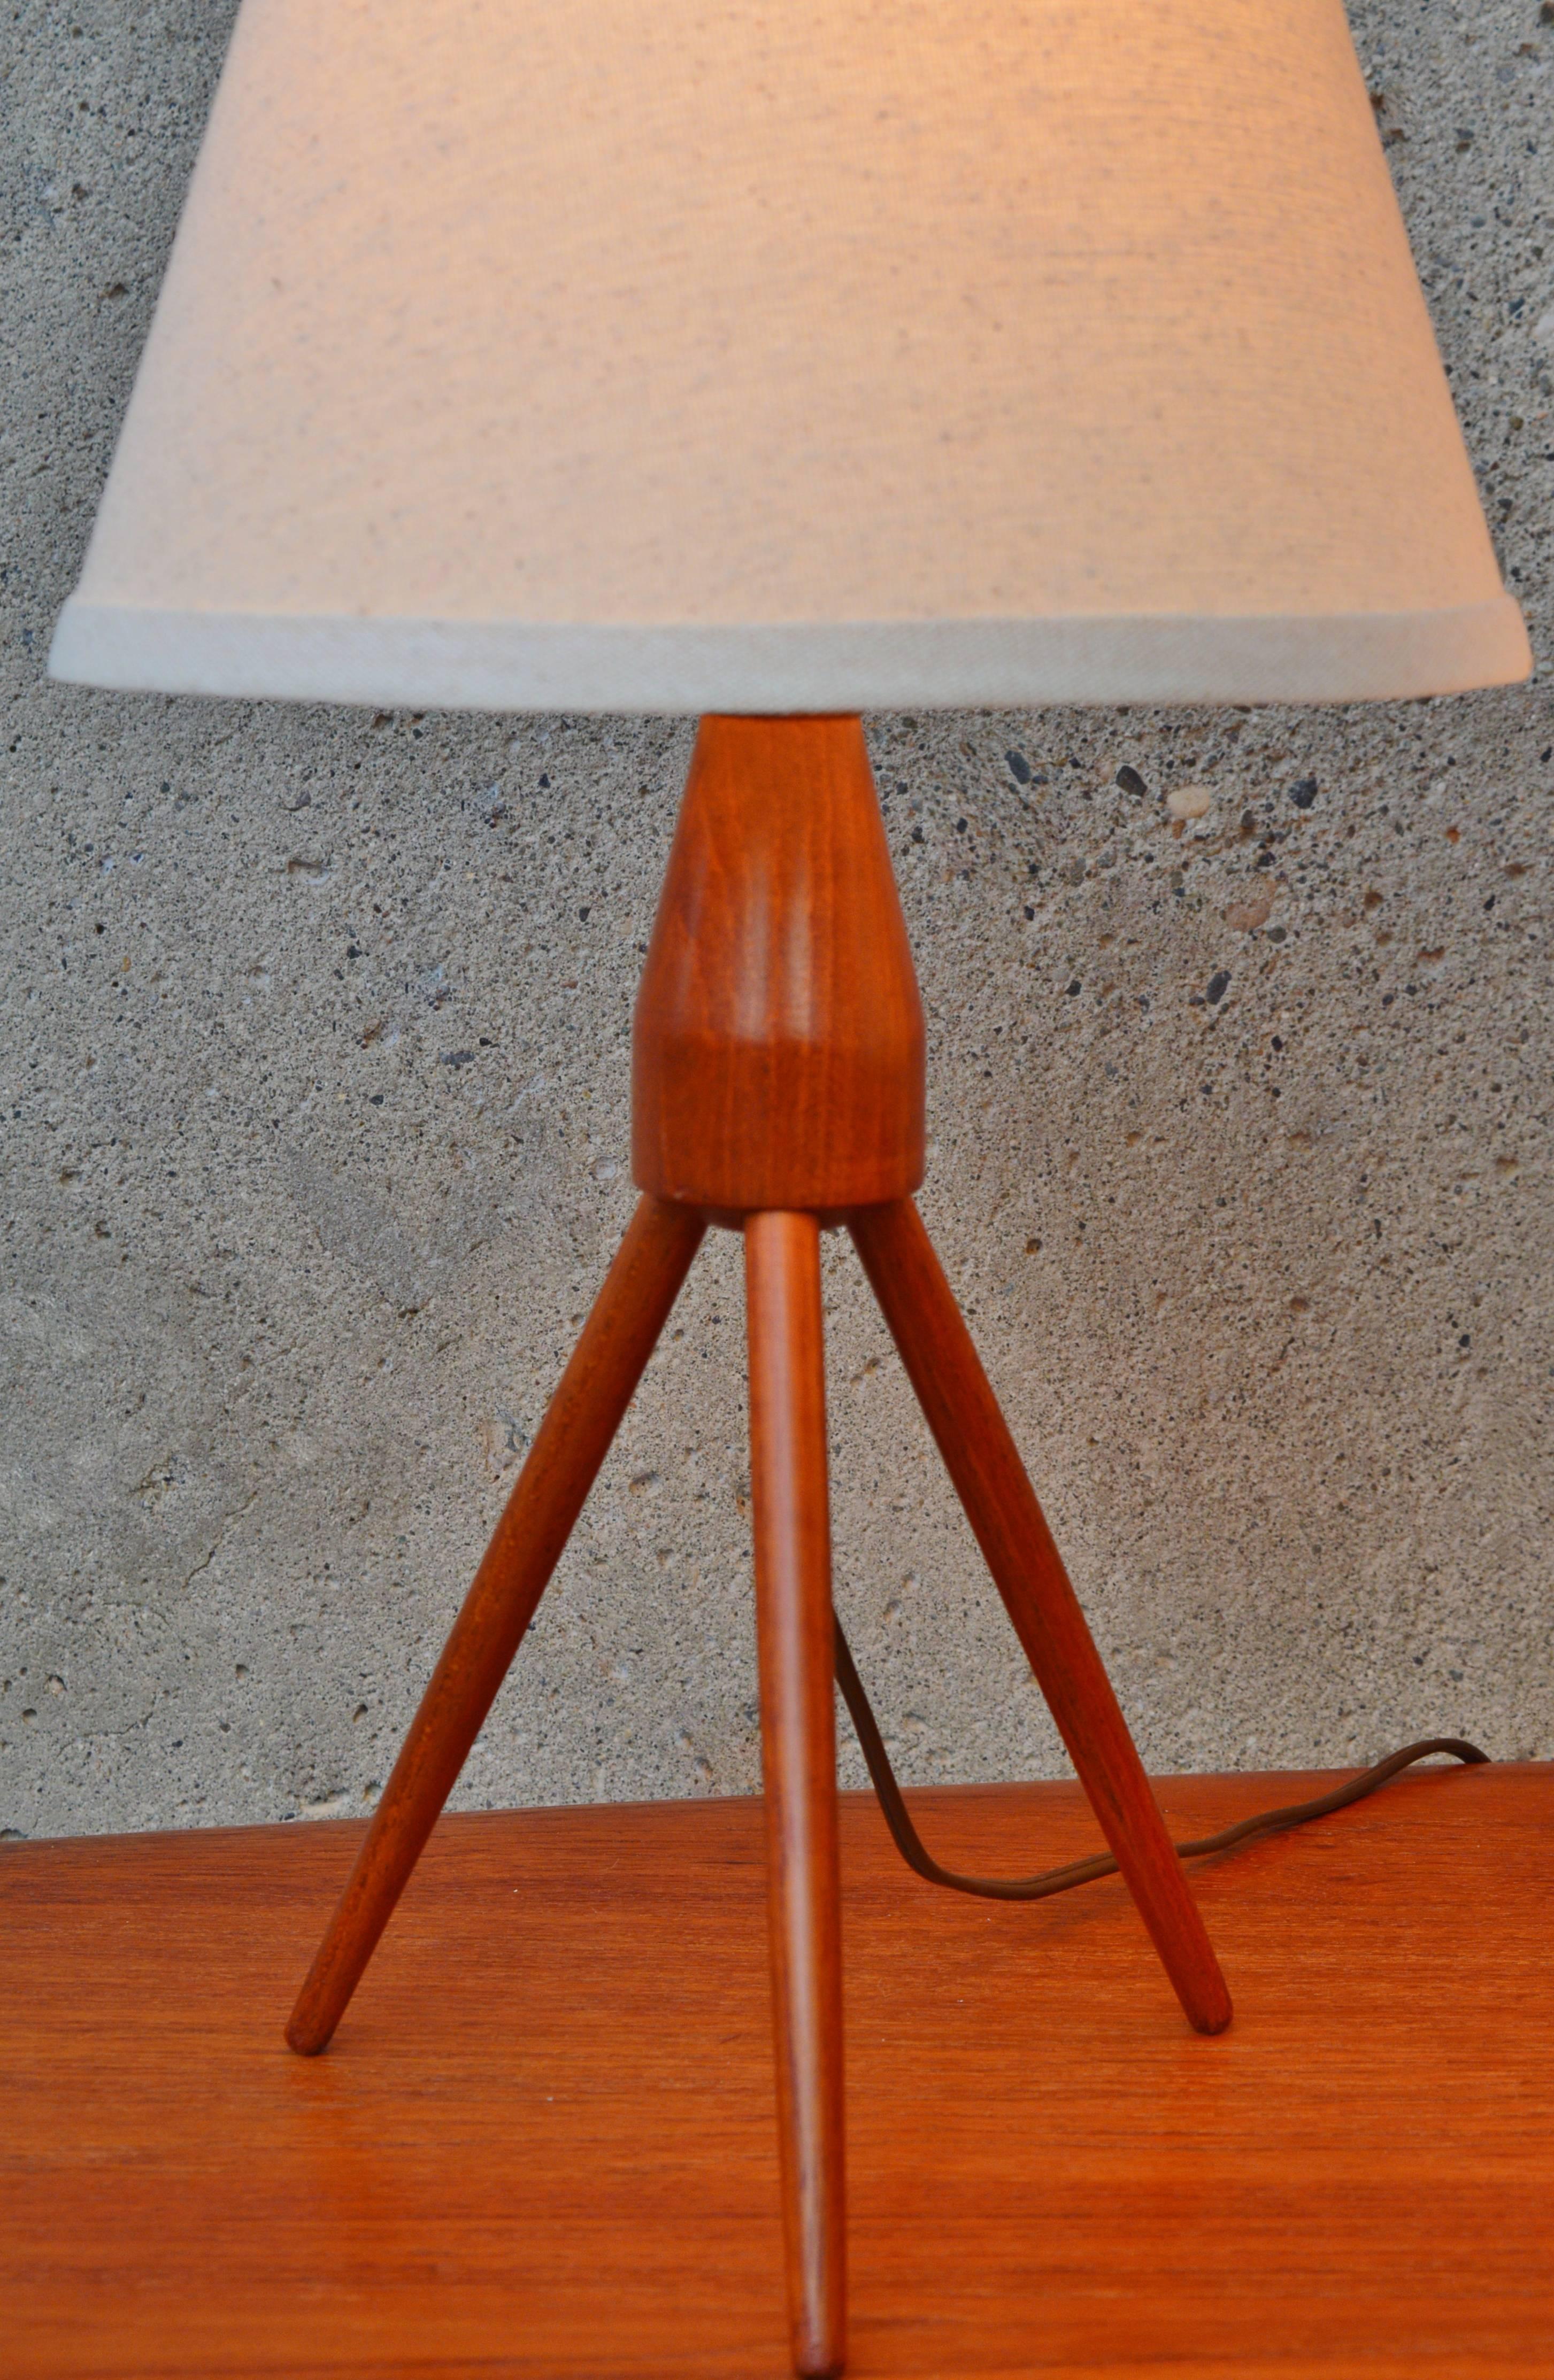 These delightful Danish Modern Atomic Era style tripod rocket table lamps are super fun! Featuring a contoured main teak stem with three tapering legs and matching cream linen clip on shades. Both in fantastic vintage condition; wired for North